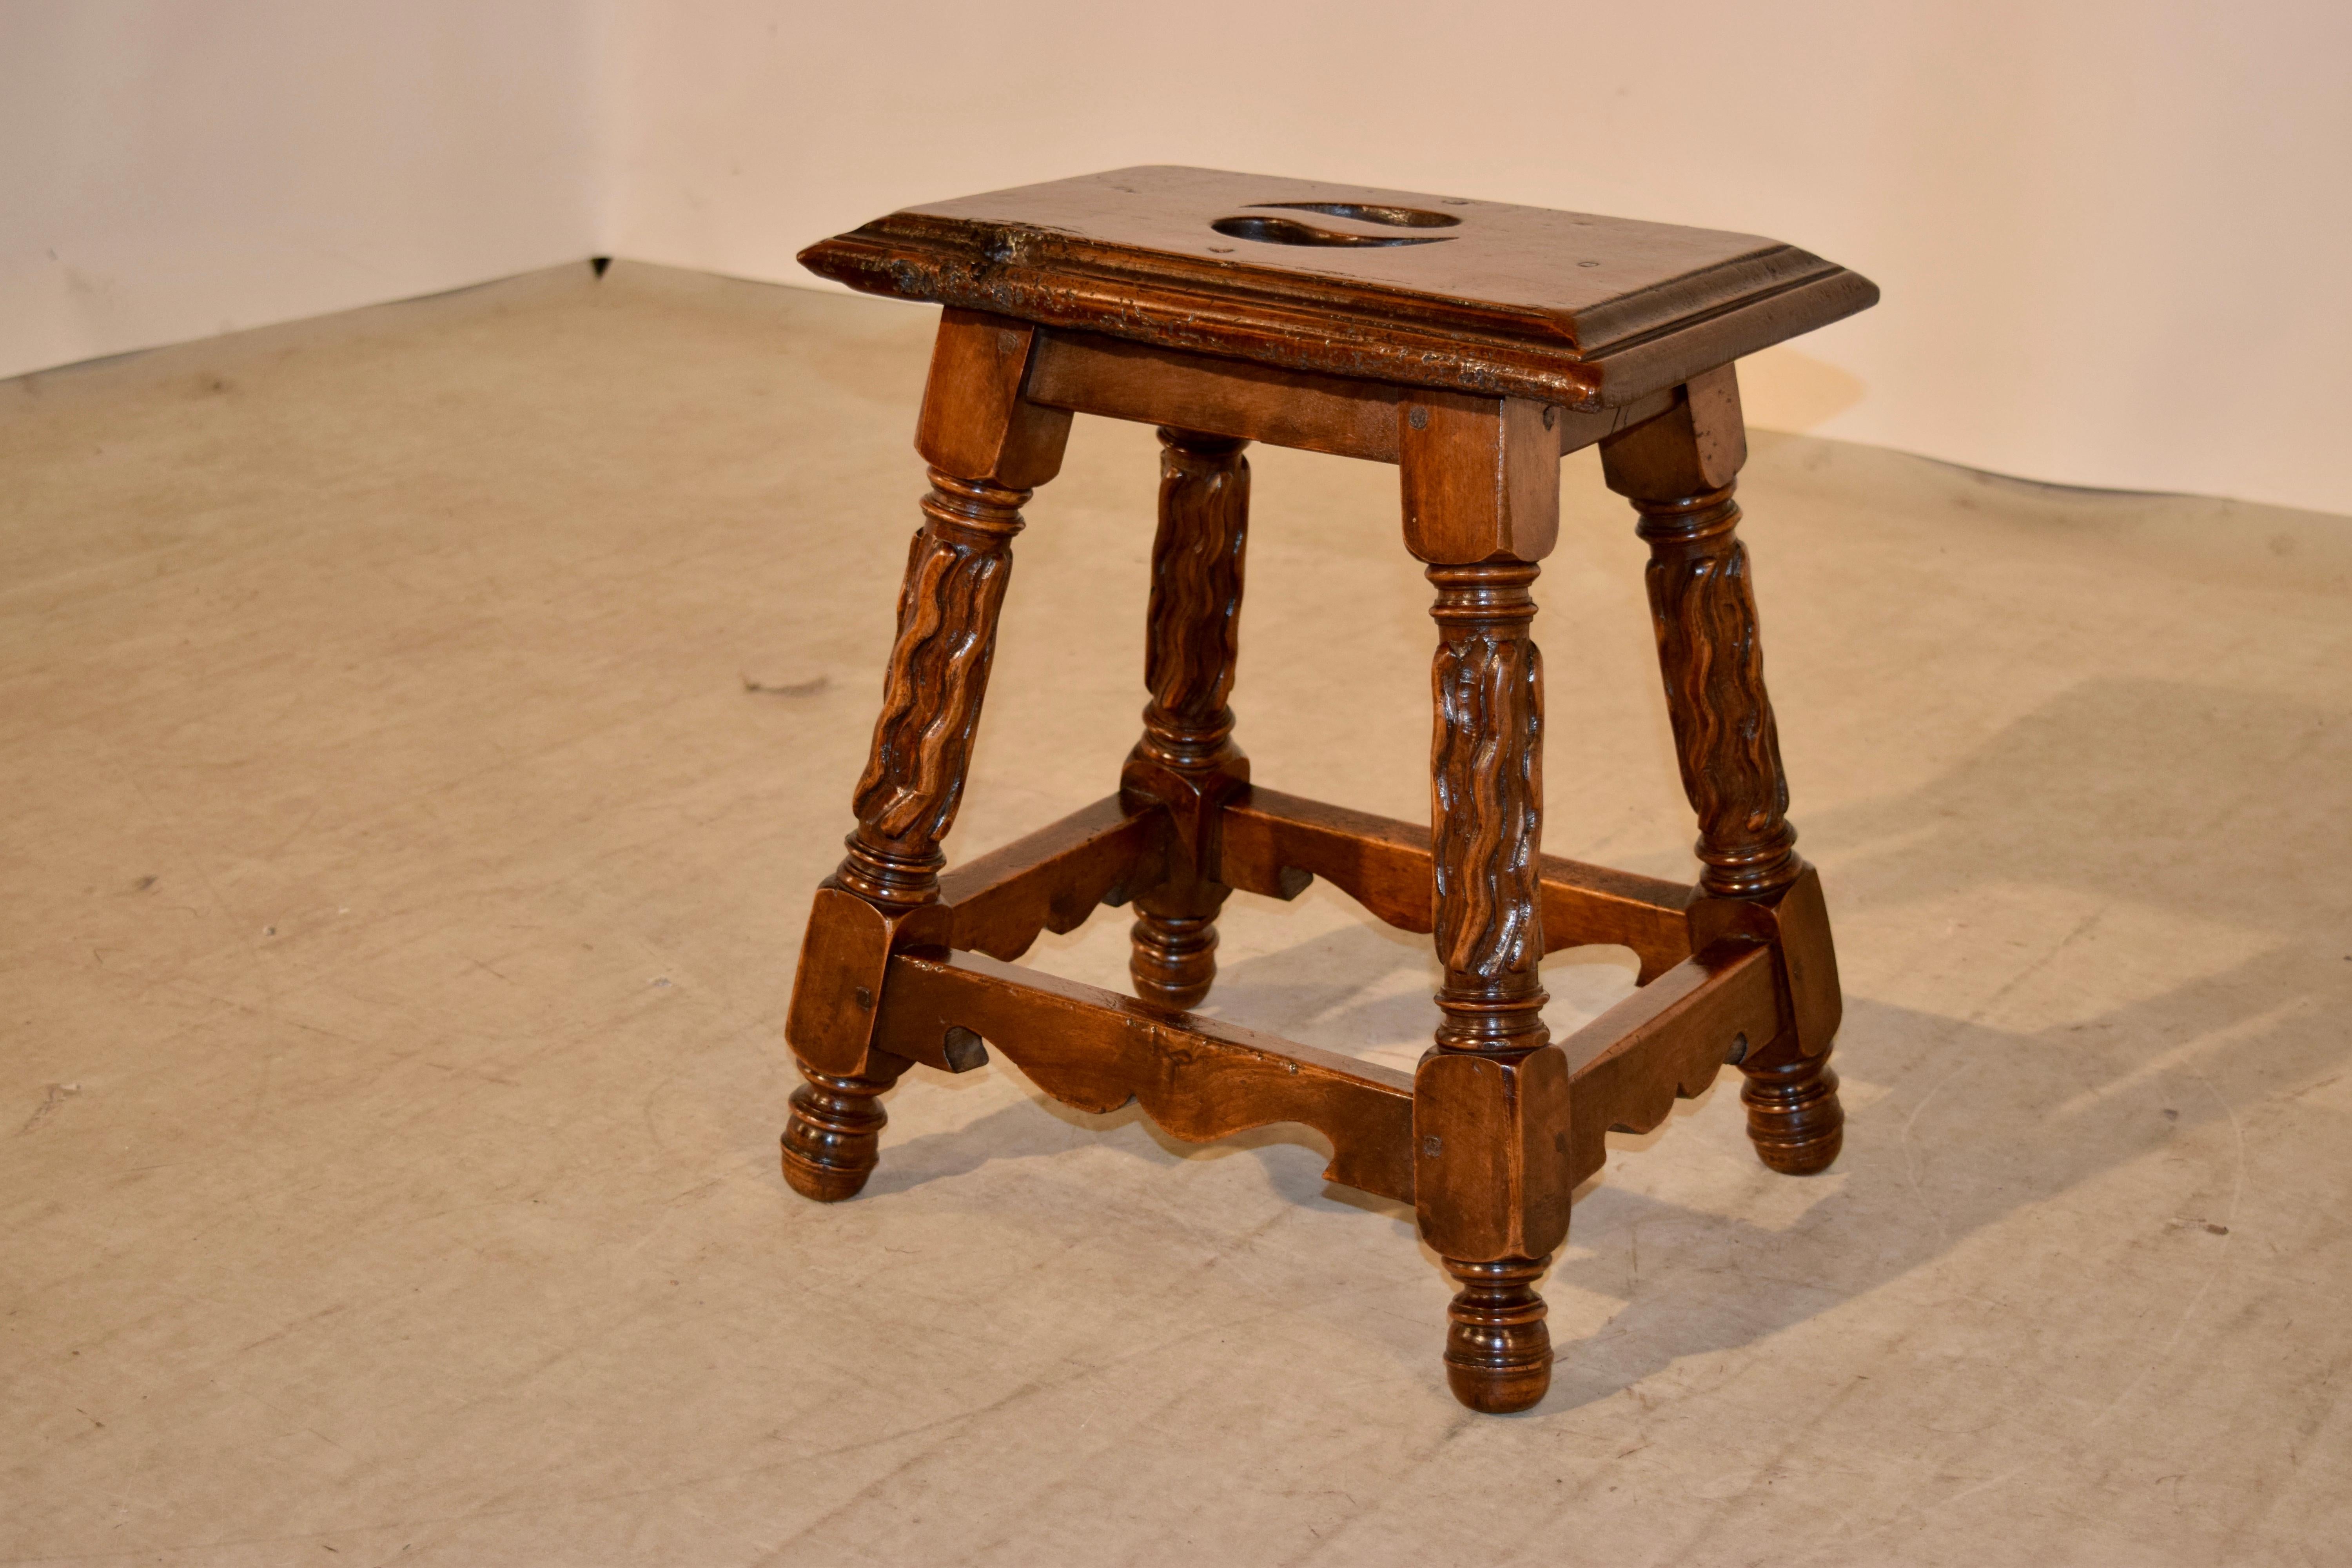 19th century French stool made of walnut. The top has a wonderfully bevelled edge, with an original knot included in the top which has a nice burl quality. The apron is simple and follows down to splayed legs which are hand-carved and decorated in